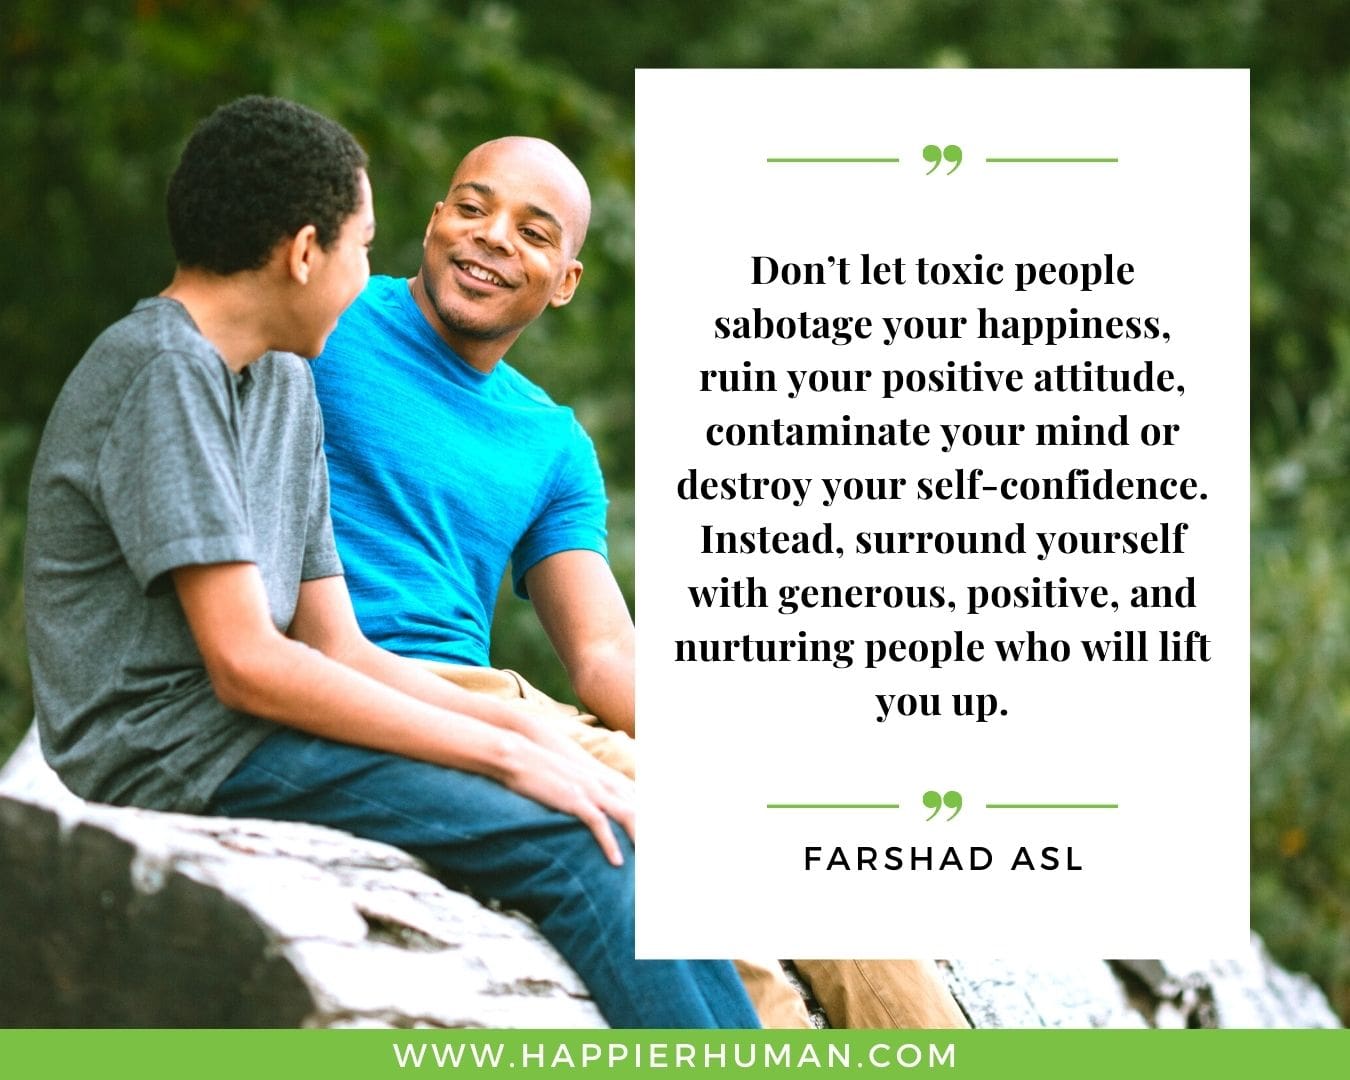 Toxic People Quotes - “Don’t let toxic people sabotage your happiness, ruin your positive attitude, contaminate your mind or destroy your self-confidence. Instead, surround yourself with generous, positive, and nurturing people who will lift you up.” – Farshad Asl